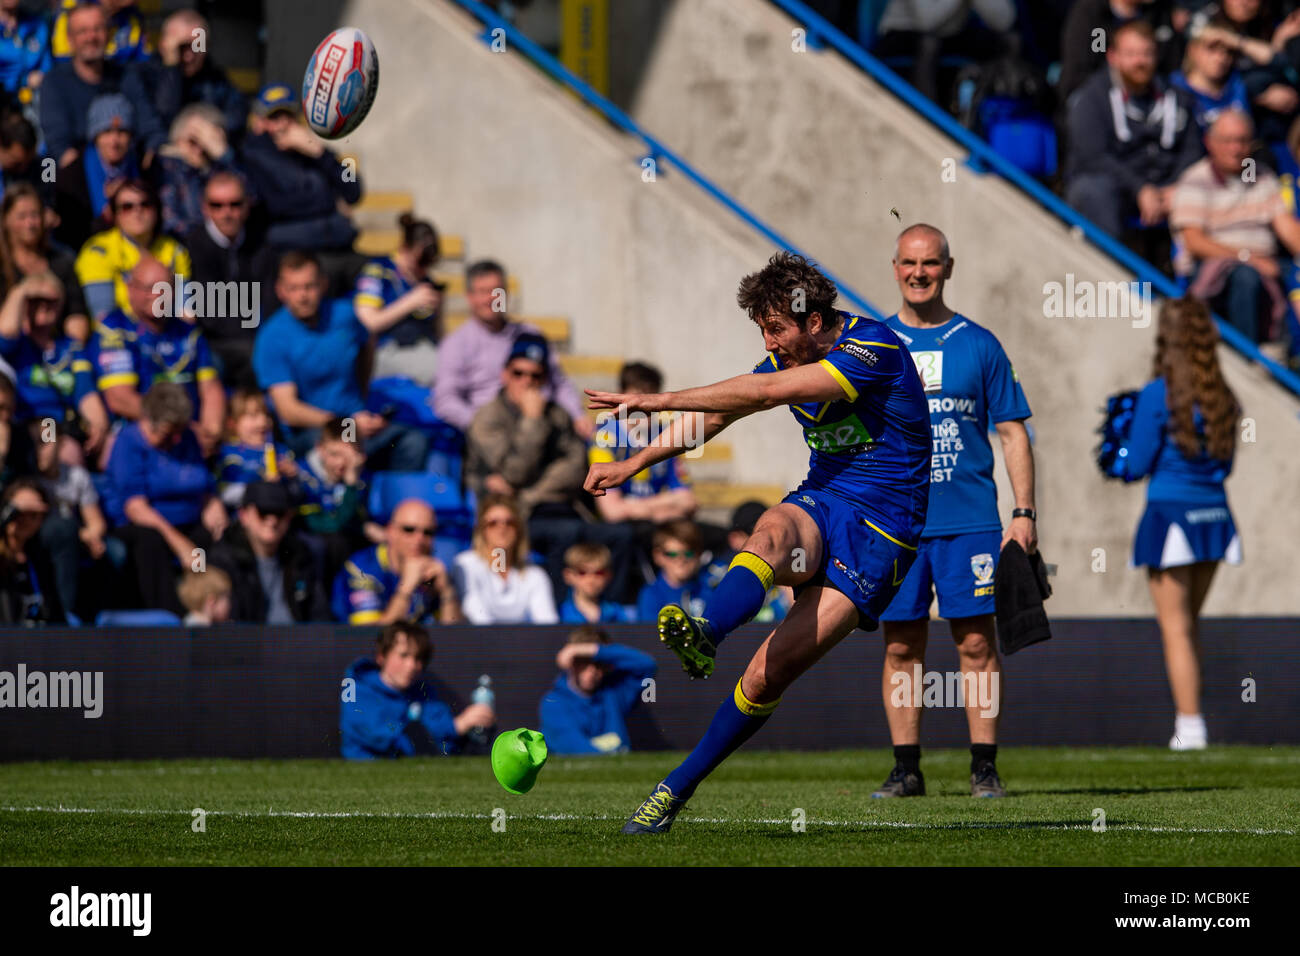 Warrington Wolves's Stefan Ratchford scores a conversion goal  14th April 2018 , The Halliwell Jones Stadium Mike Gregory Way, Warrington, WA2 7NE, England;  Betfred Super League rugby, Round 11, Warrington Wolves v Hull Kingston Rovers Stock Photo